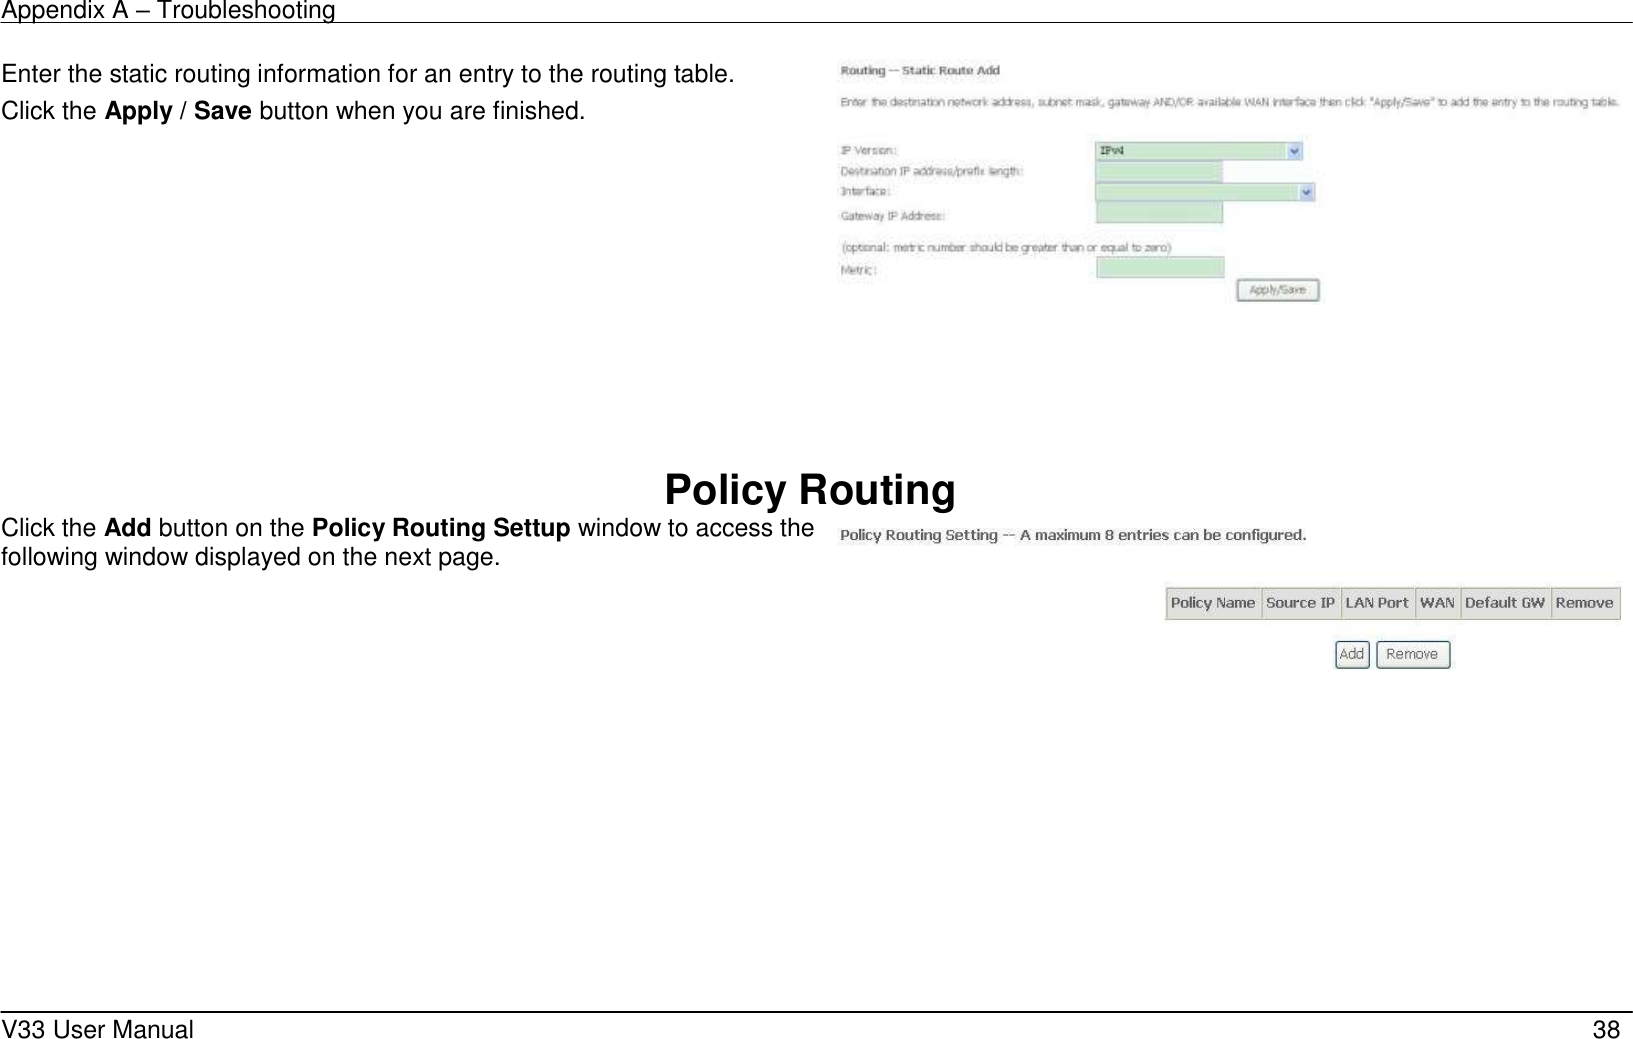 Appendix A – Troubleshooting    V33 User Manual   38 Enter the static routing information for an entry to the routing table. Click the Apply / Save button when you are finished.        Policy Routing Click the Add button on the Policy Routing Settup window to access the following window displayed on the next page.     